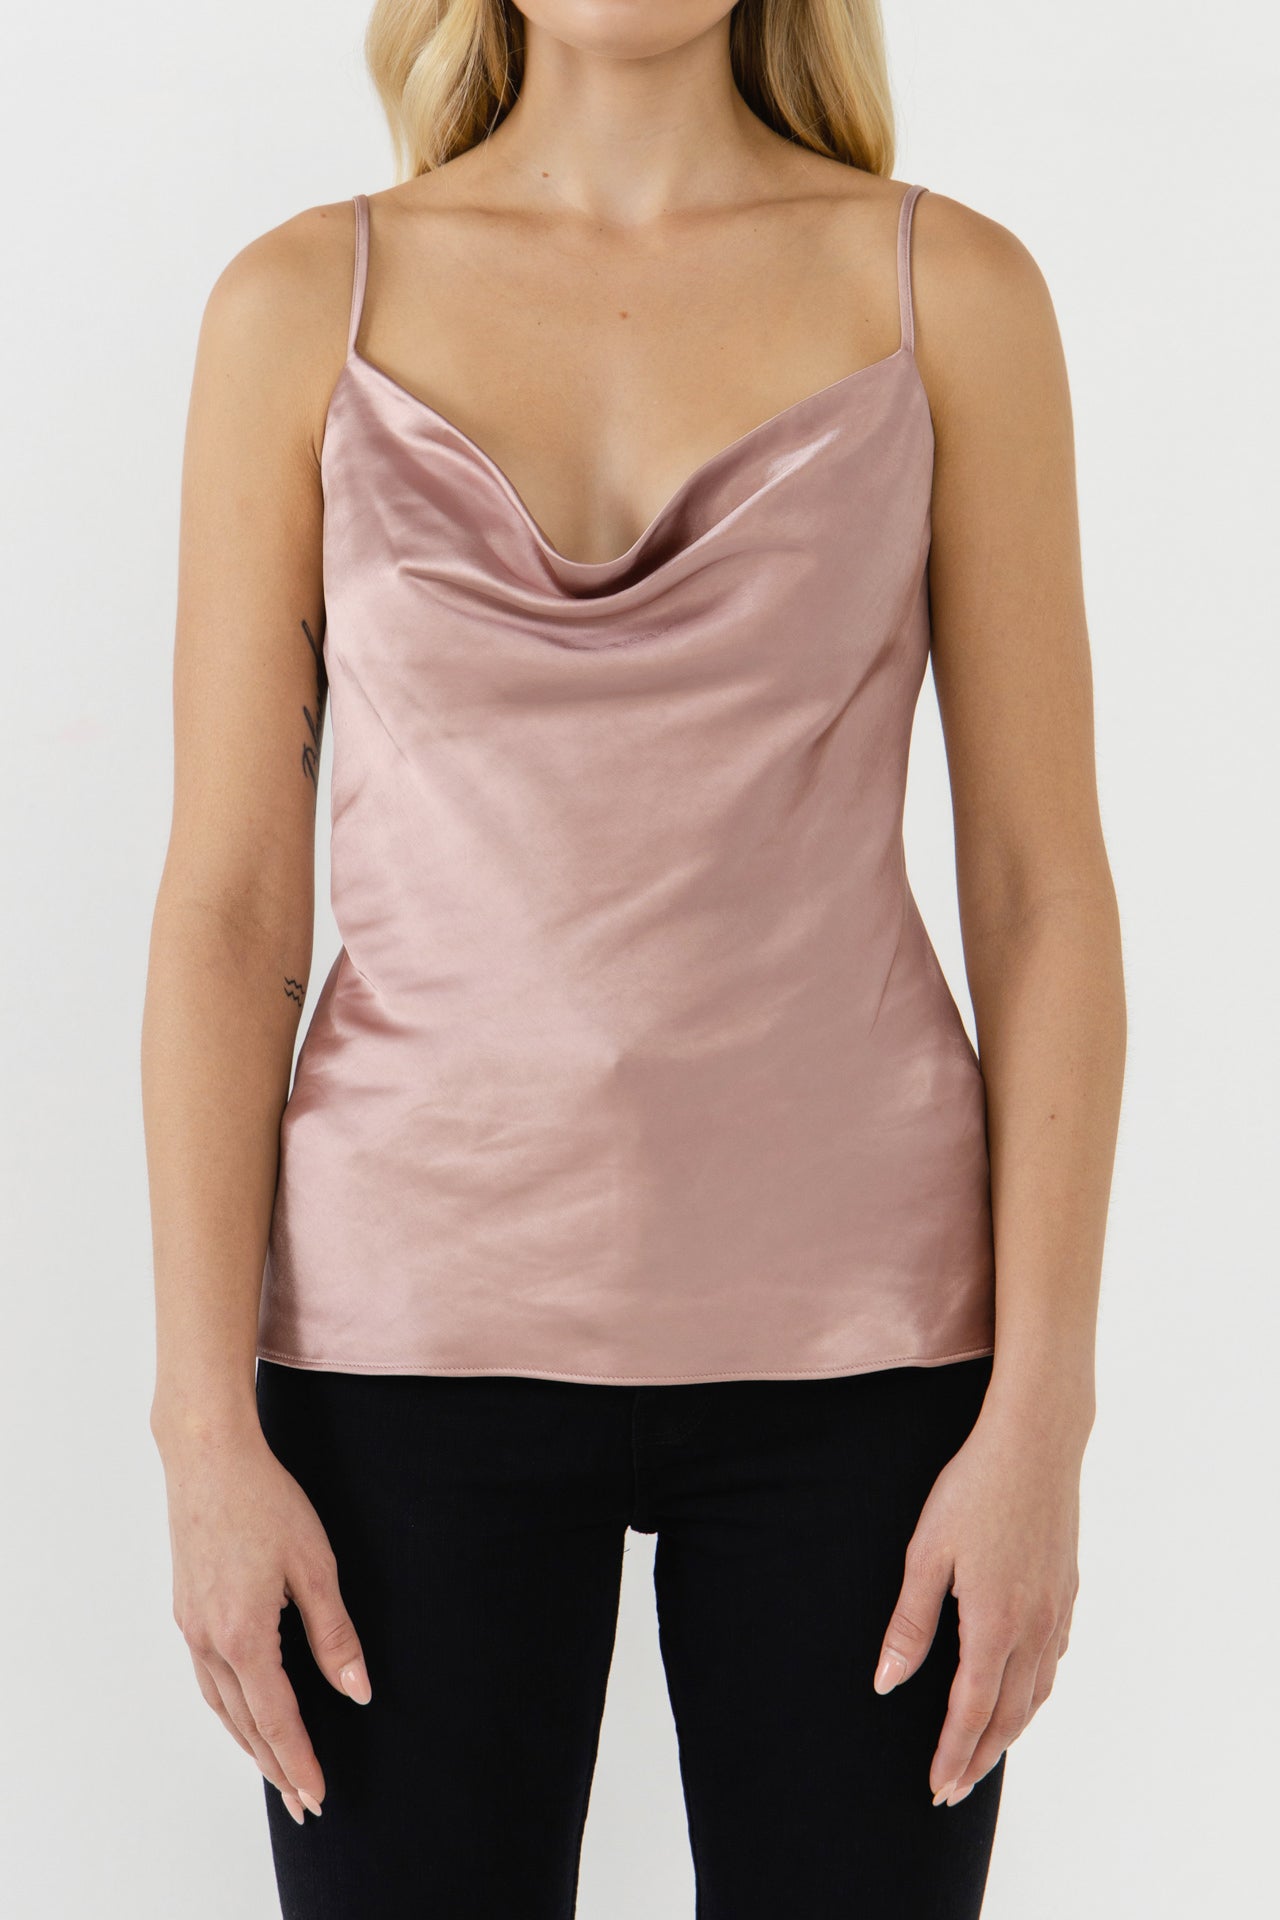 Baby Pink Cowl Spaghetti Strap Long Cami Top